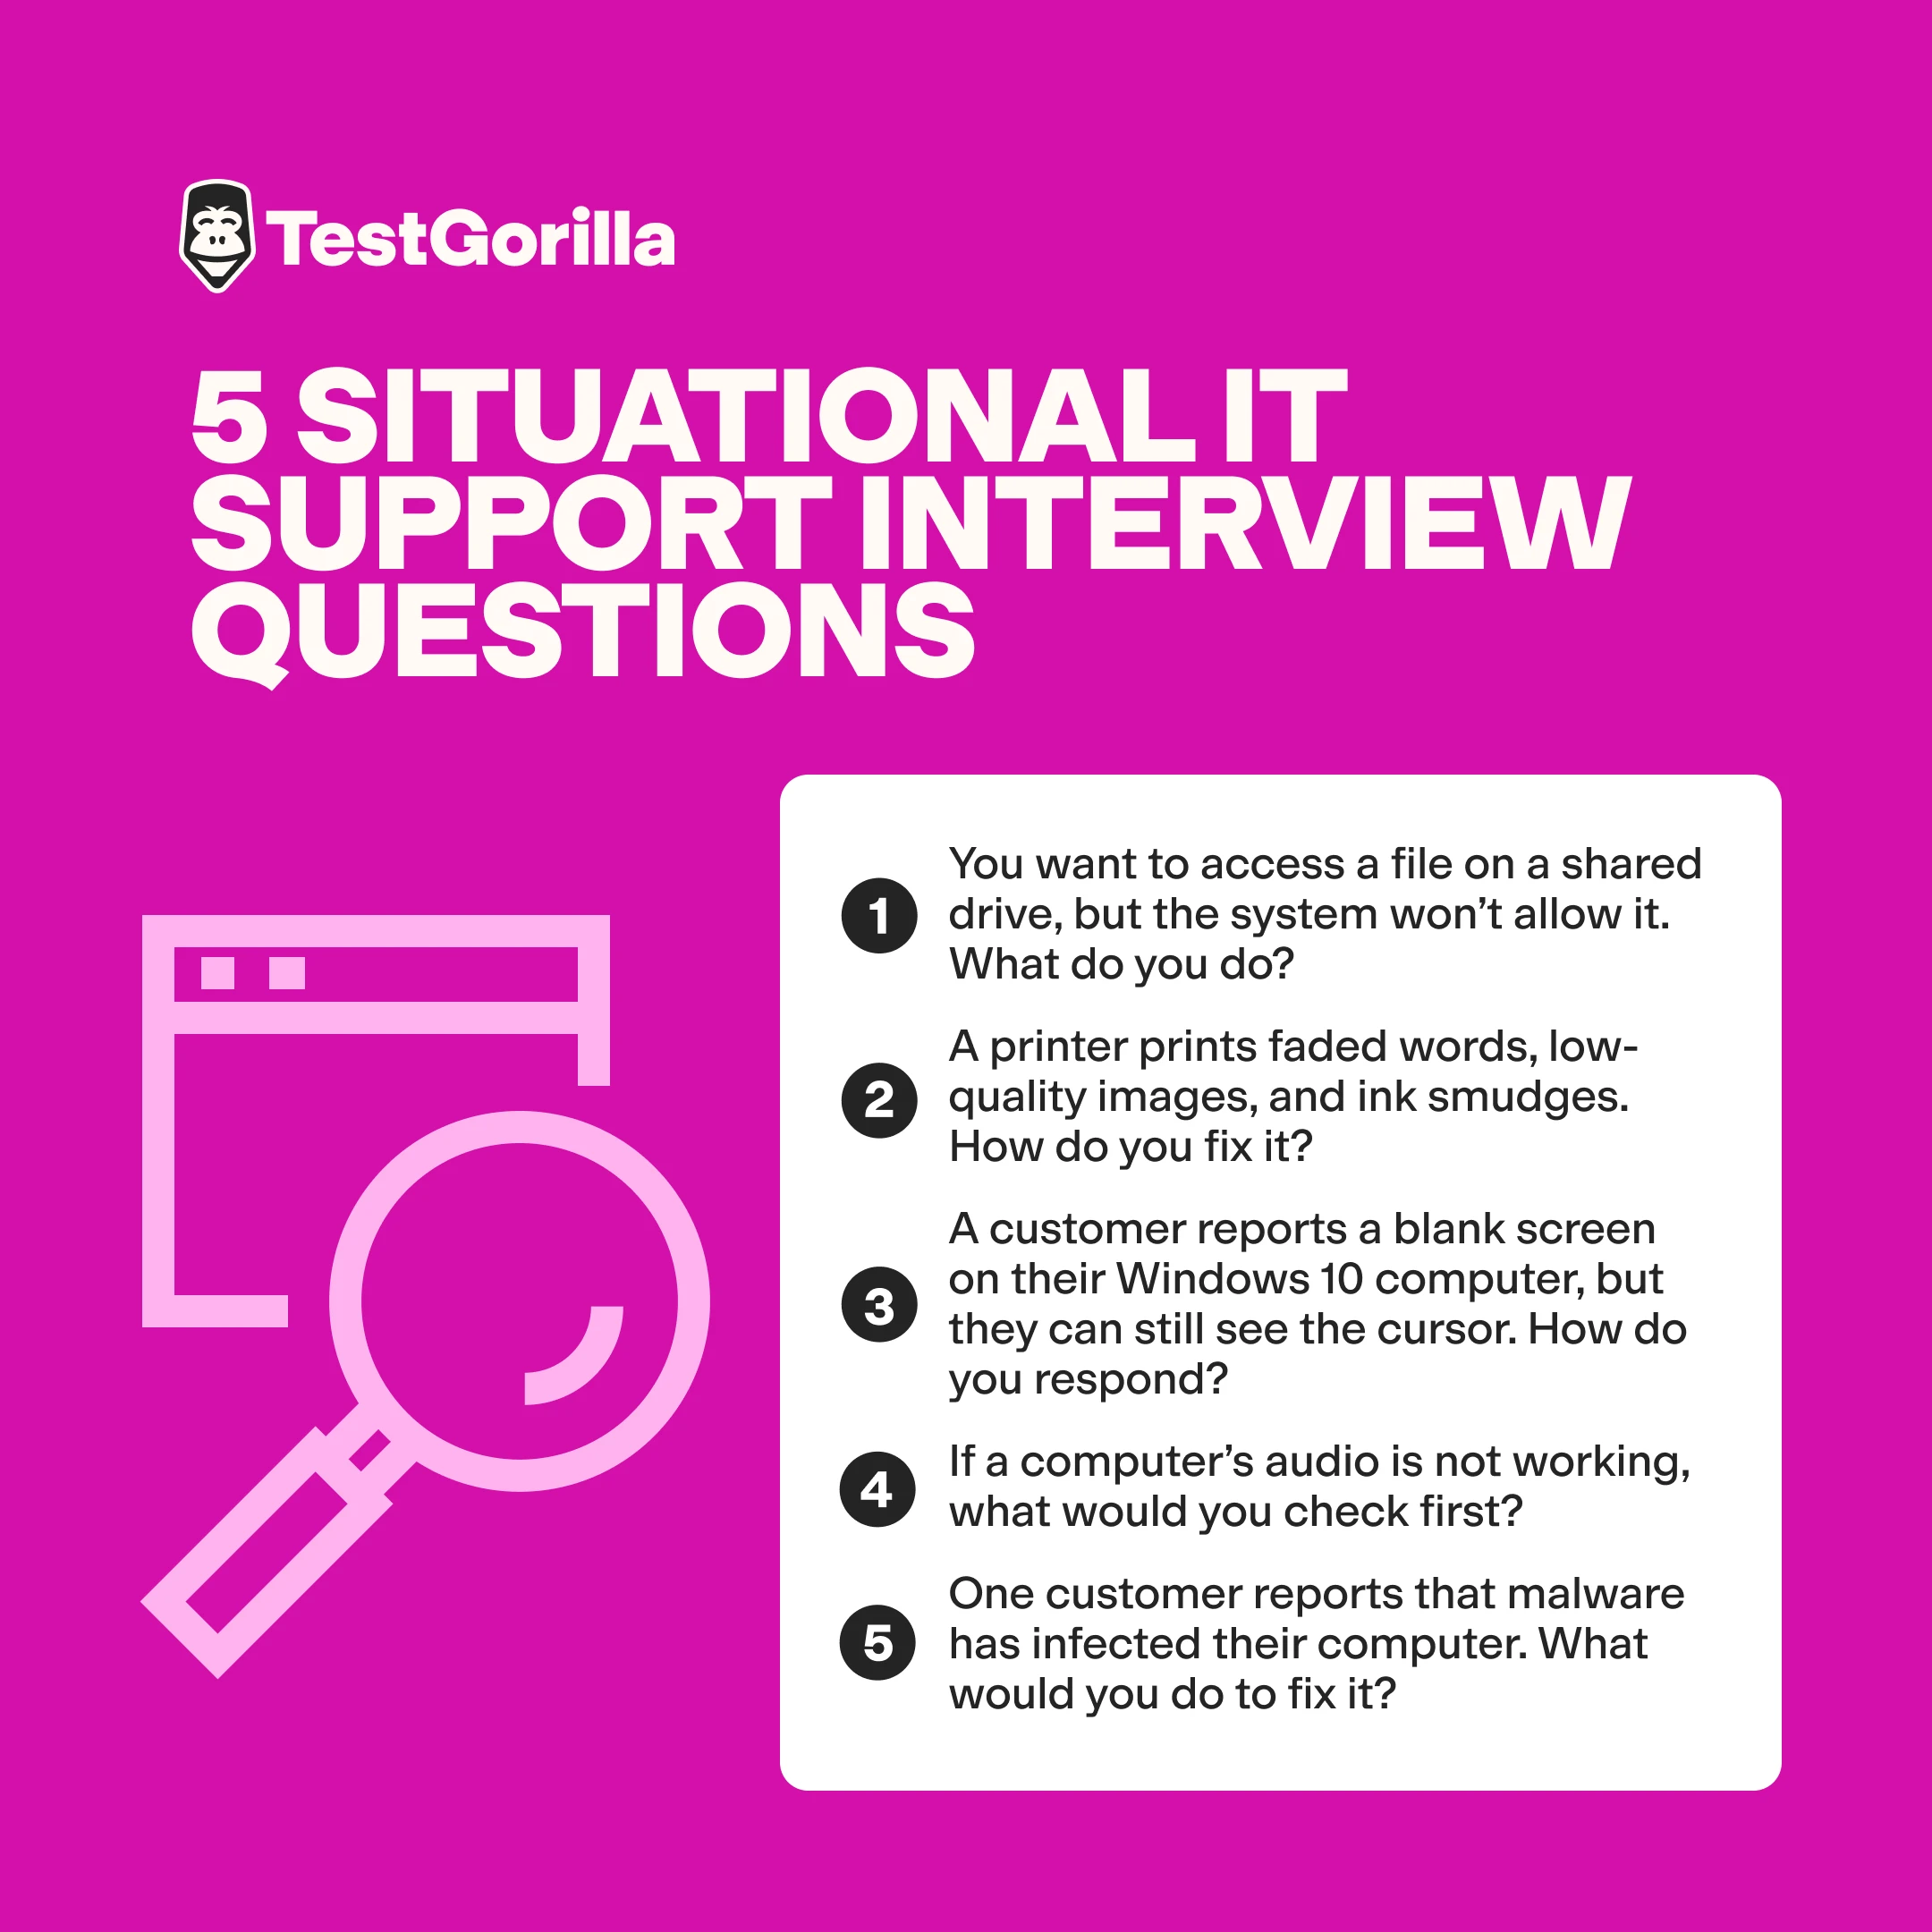 Situational IT support interview questions to ask technical professionals 